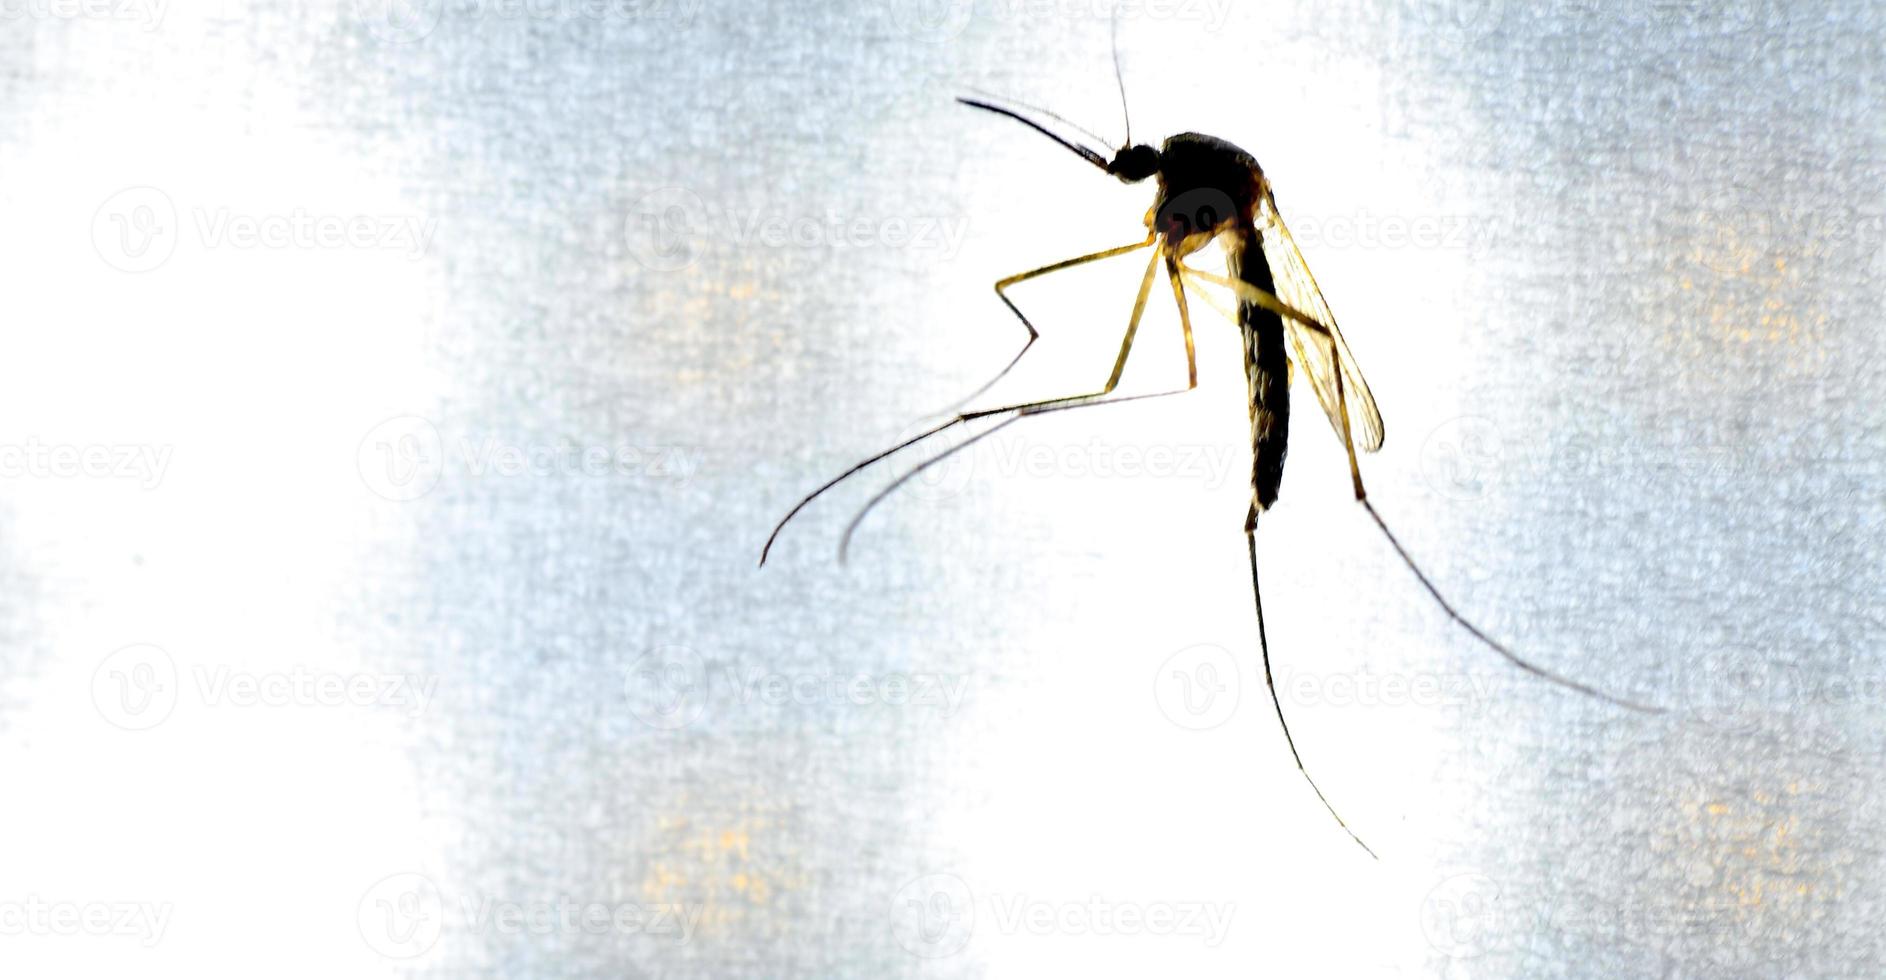 Mosquitoes are feeding on human skin blood. Mosquitoes are carriers of dengue fever and malaria. Dengue fever is very prevalent during the rainy season. photo